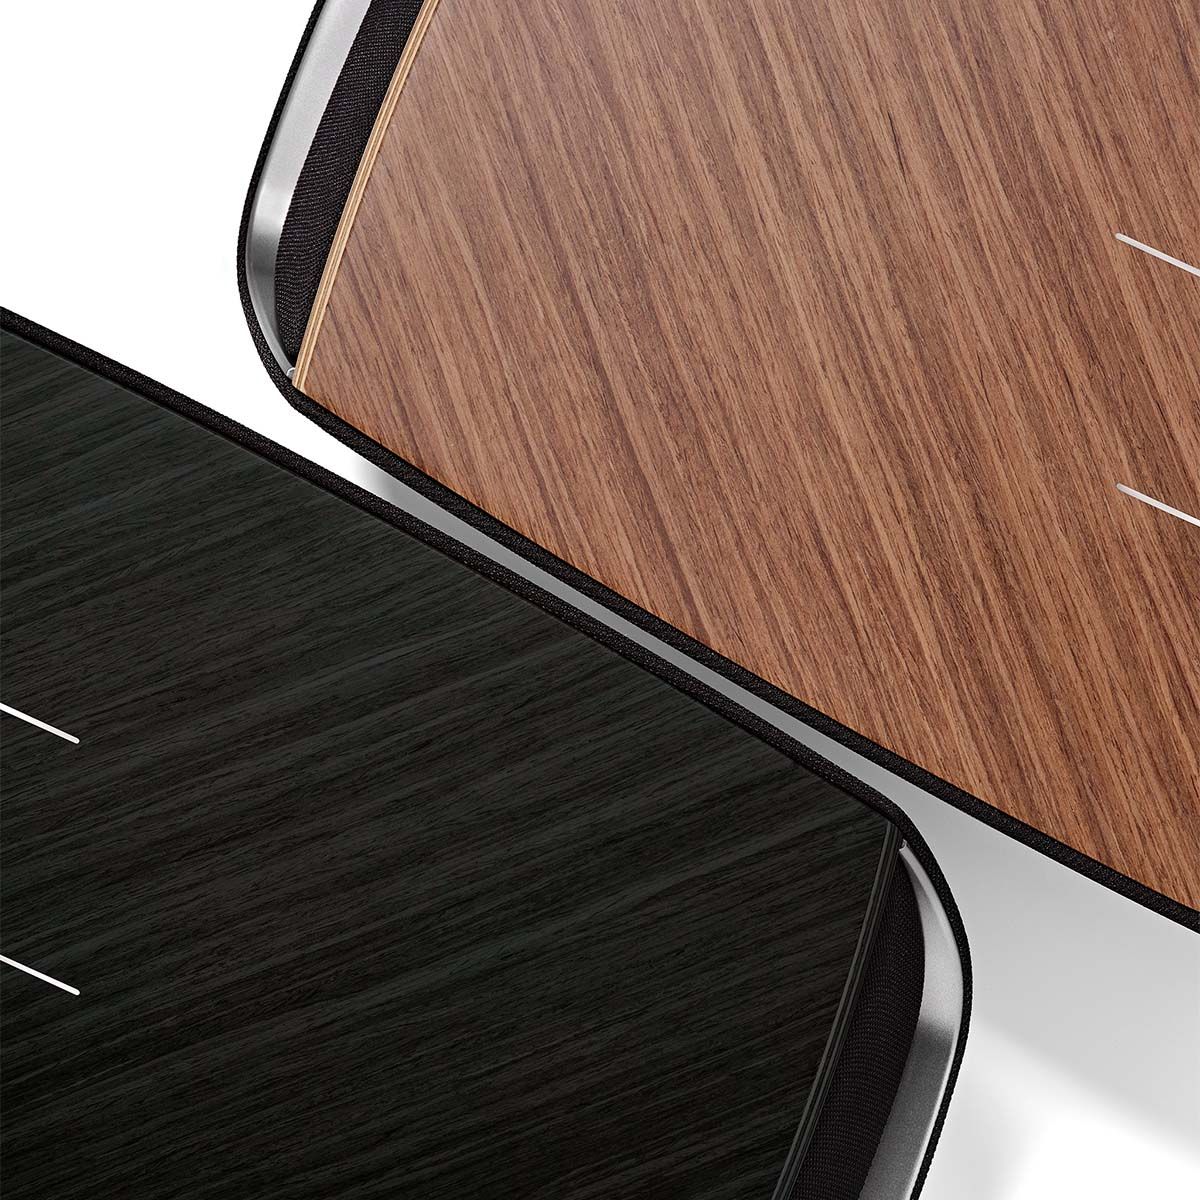 Sonus Faber Omnia Wireless Smart Speaker, Walnut and Graphite, side by side views of top panels